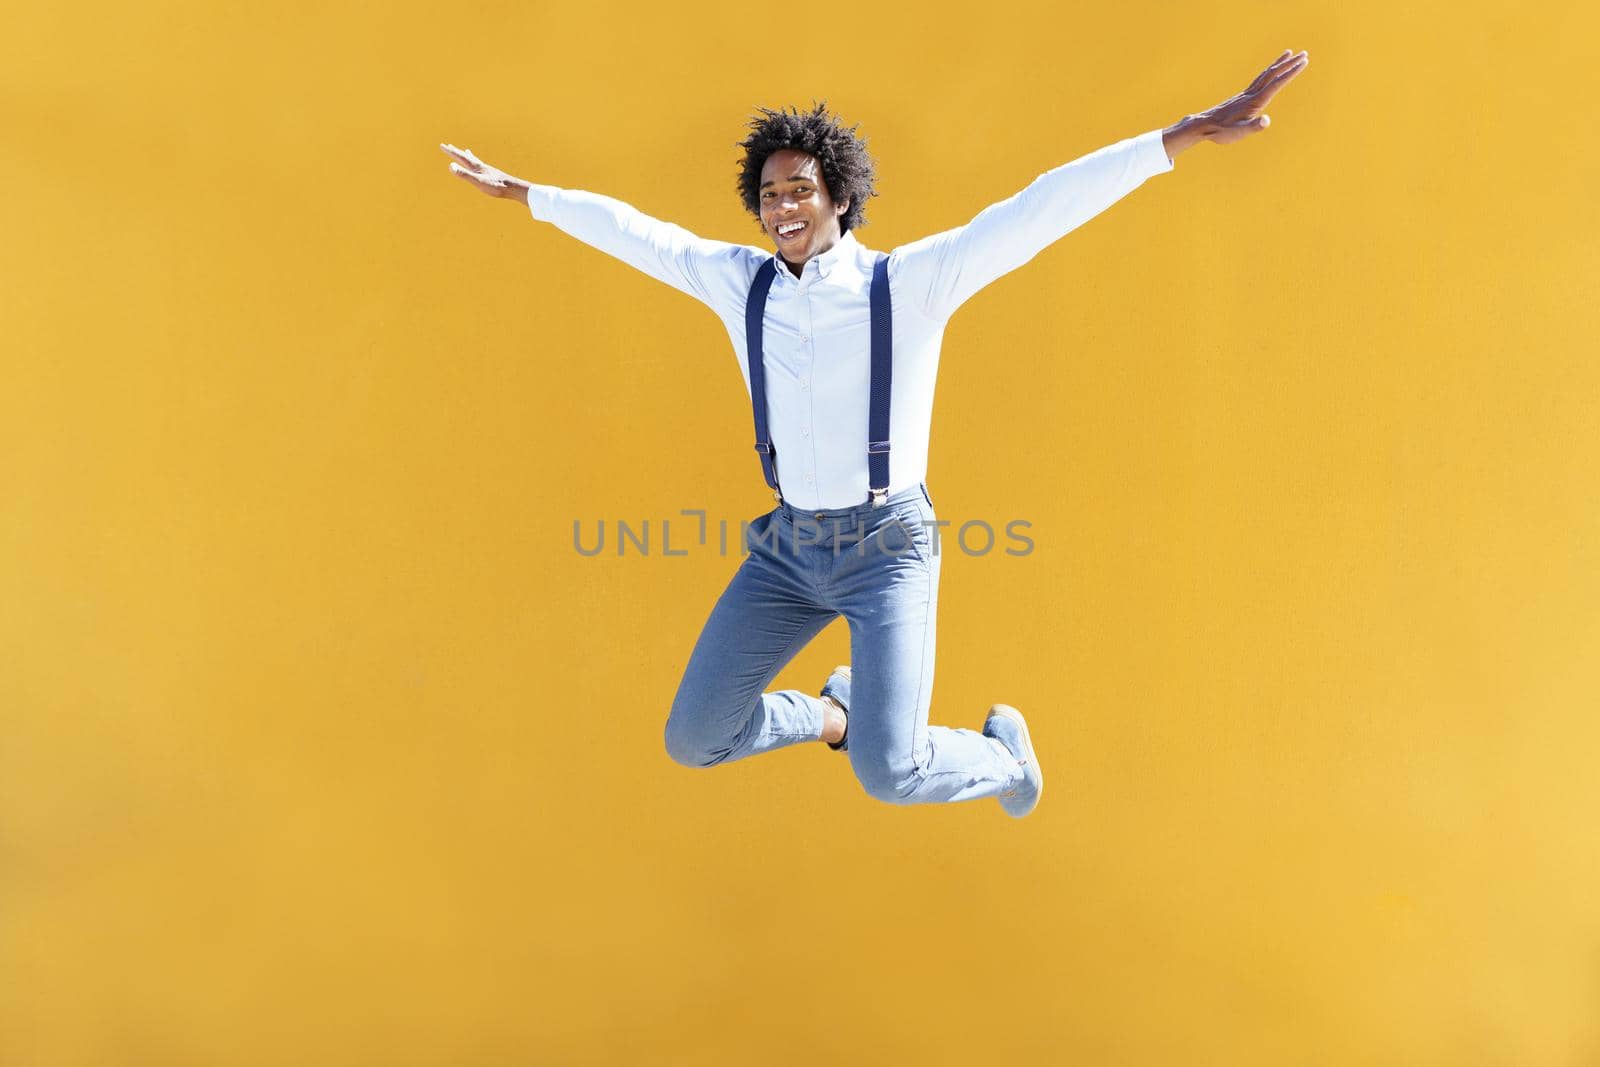 Black man with afro hair jumping on a yellow urban background. Guy wearing shirt and suspenders.